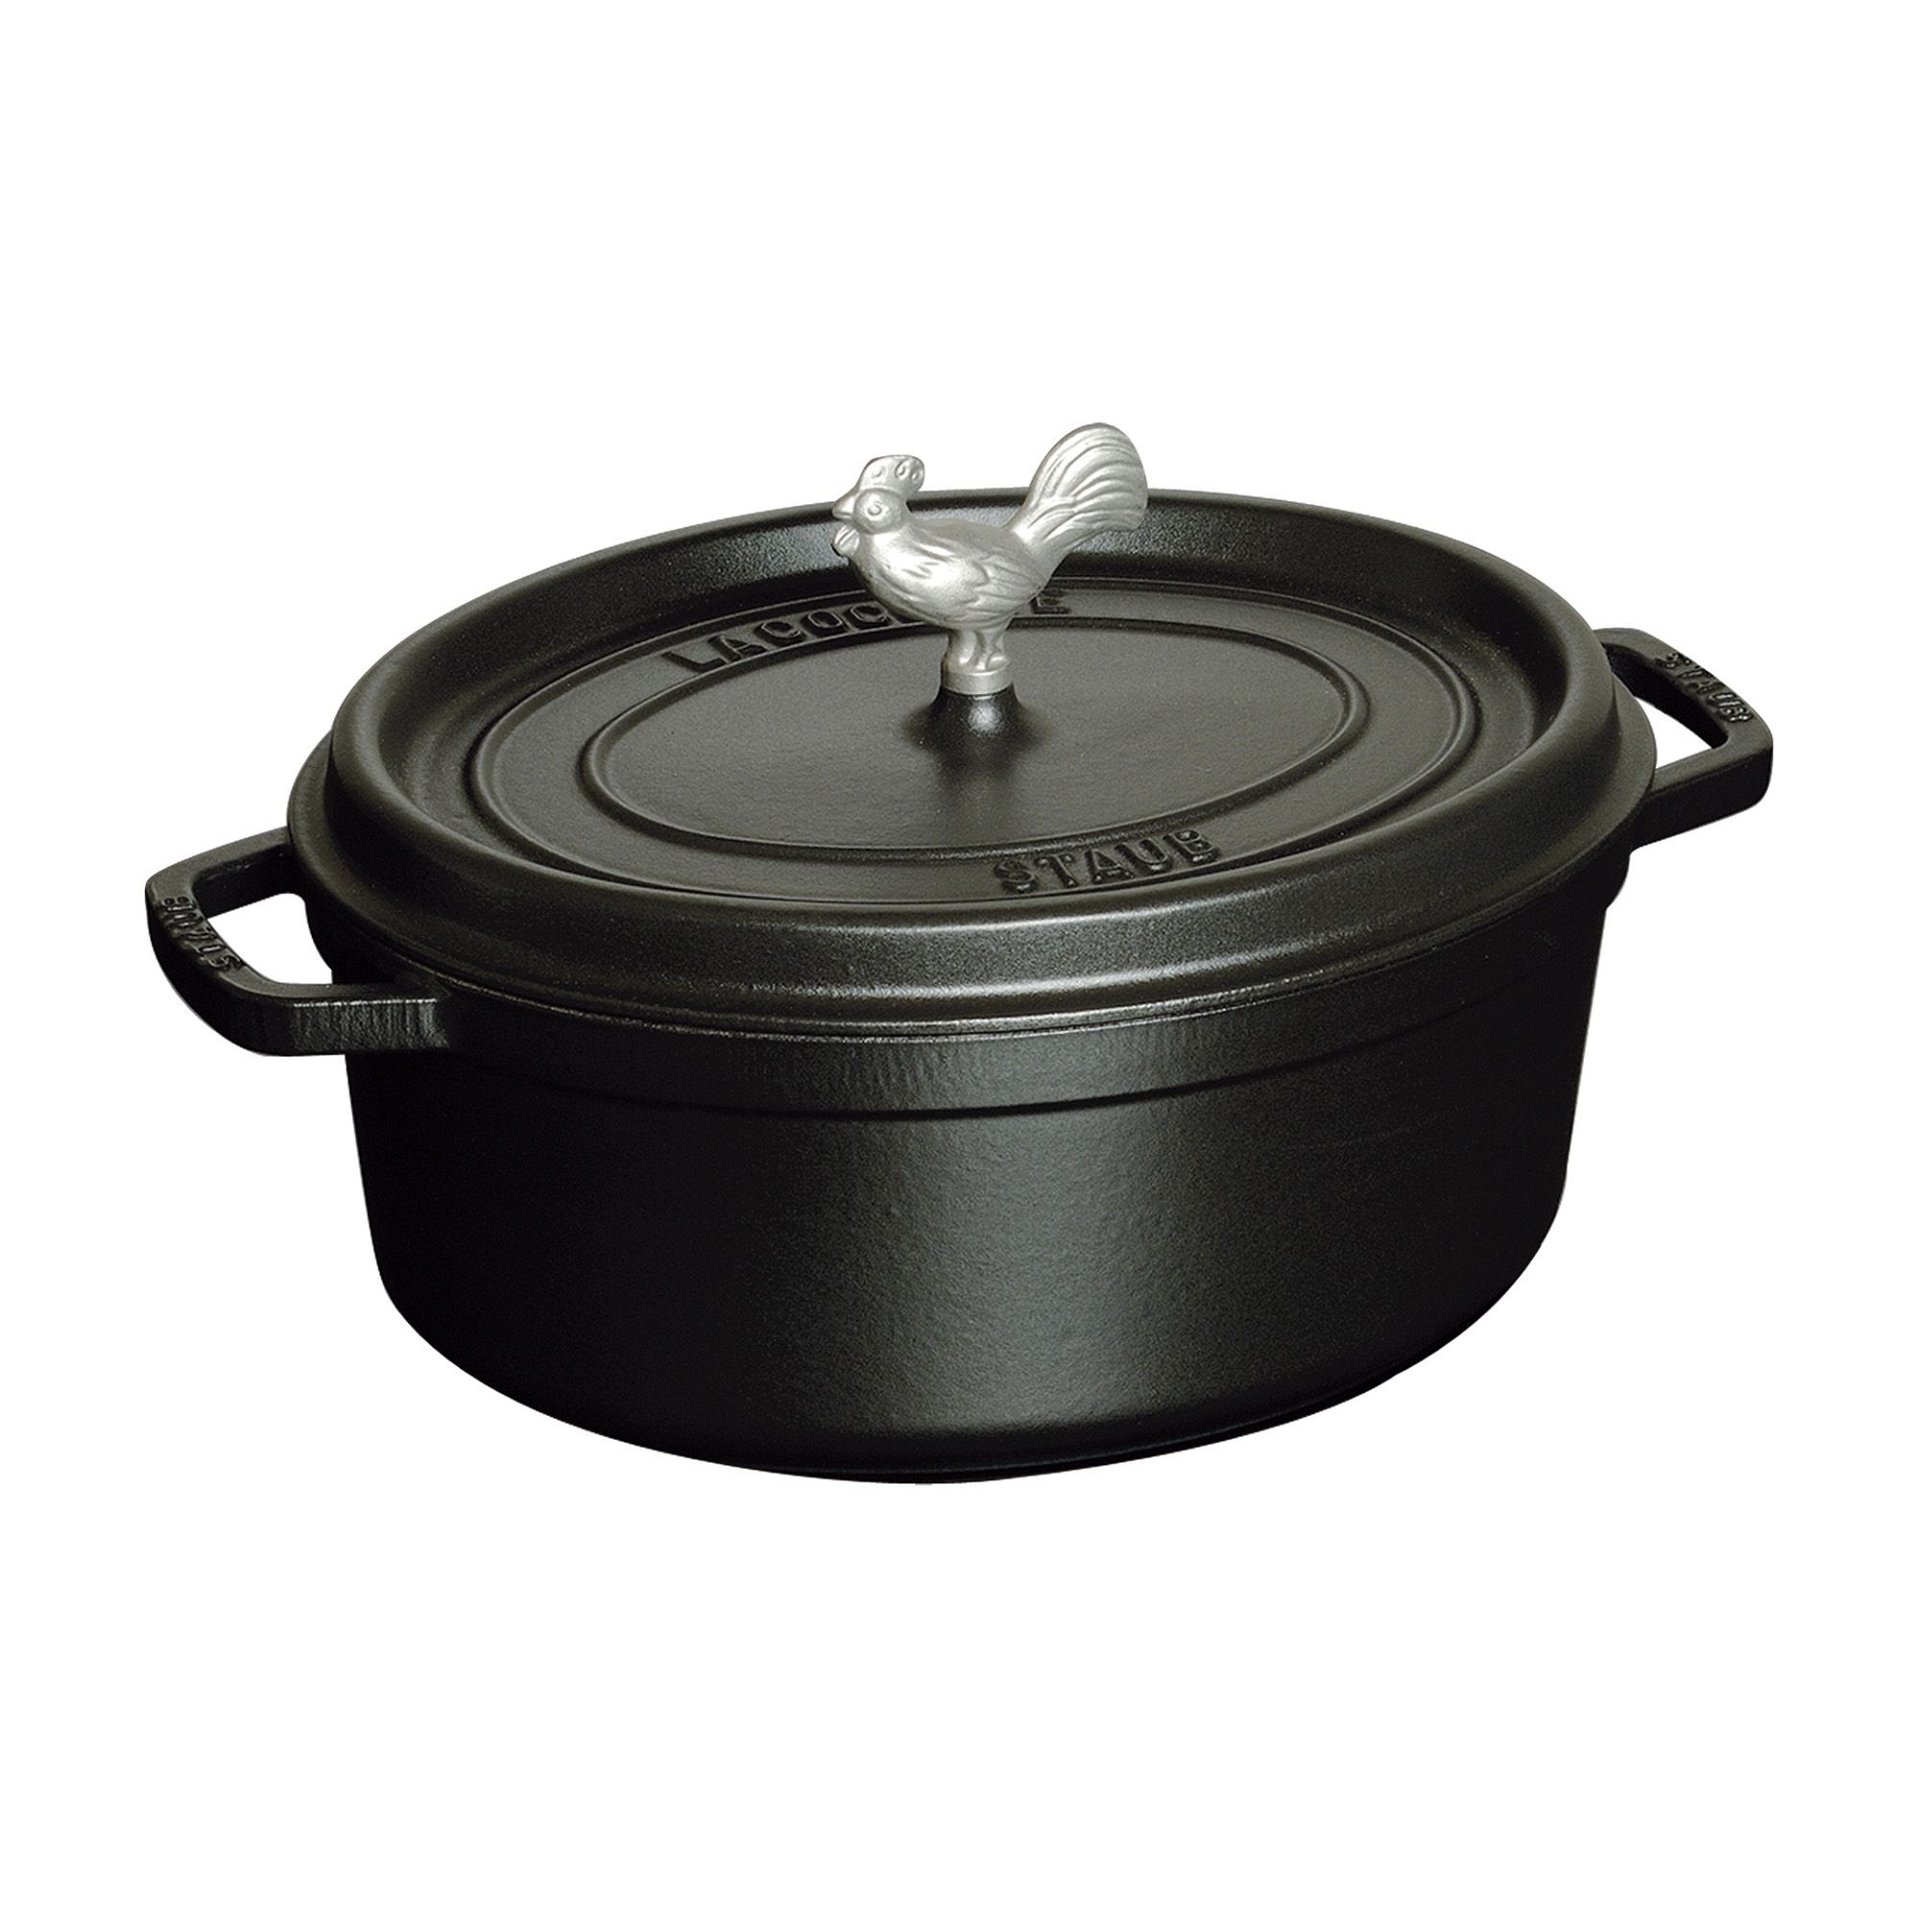 Staub Cast Iron Oval Cocotte, Dutch Oven, 5.75- or 7-Quart on Food52